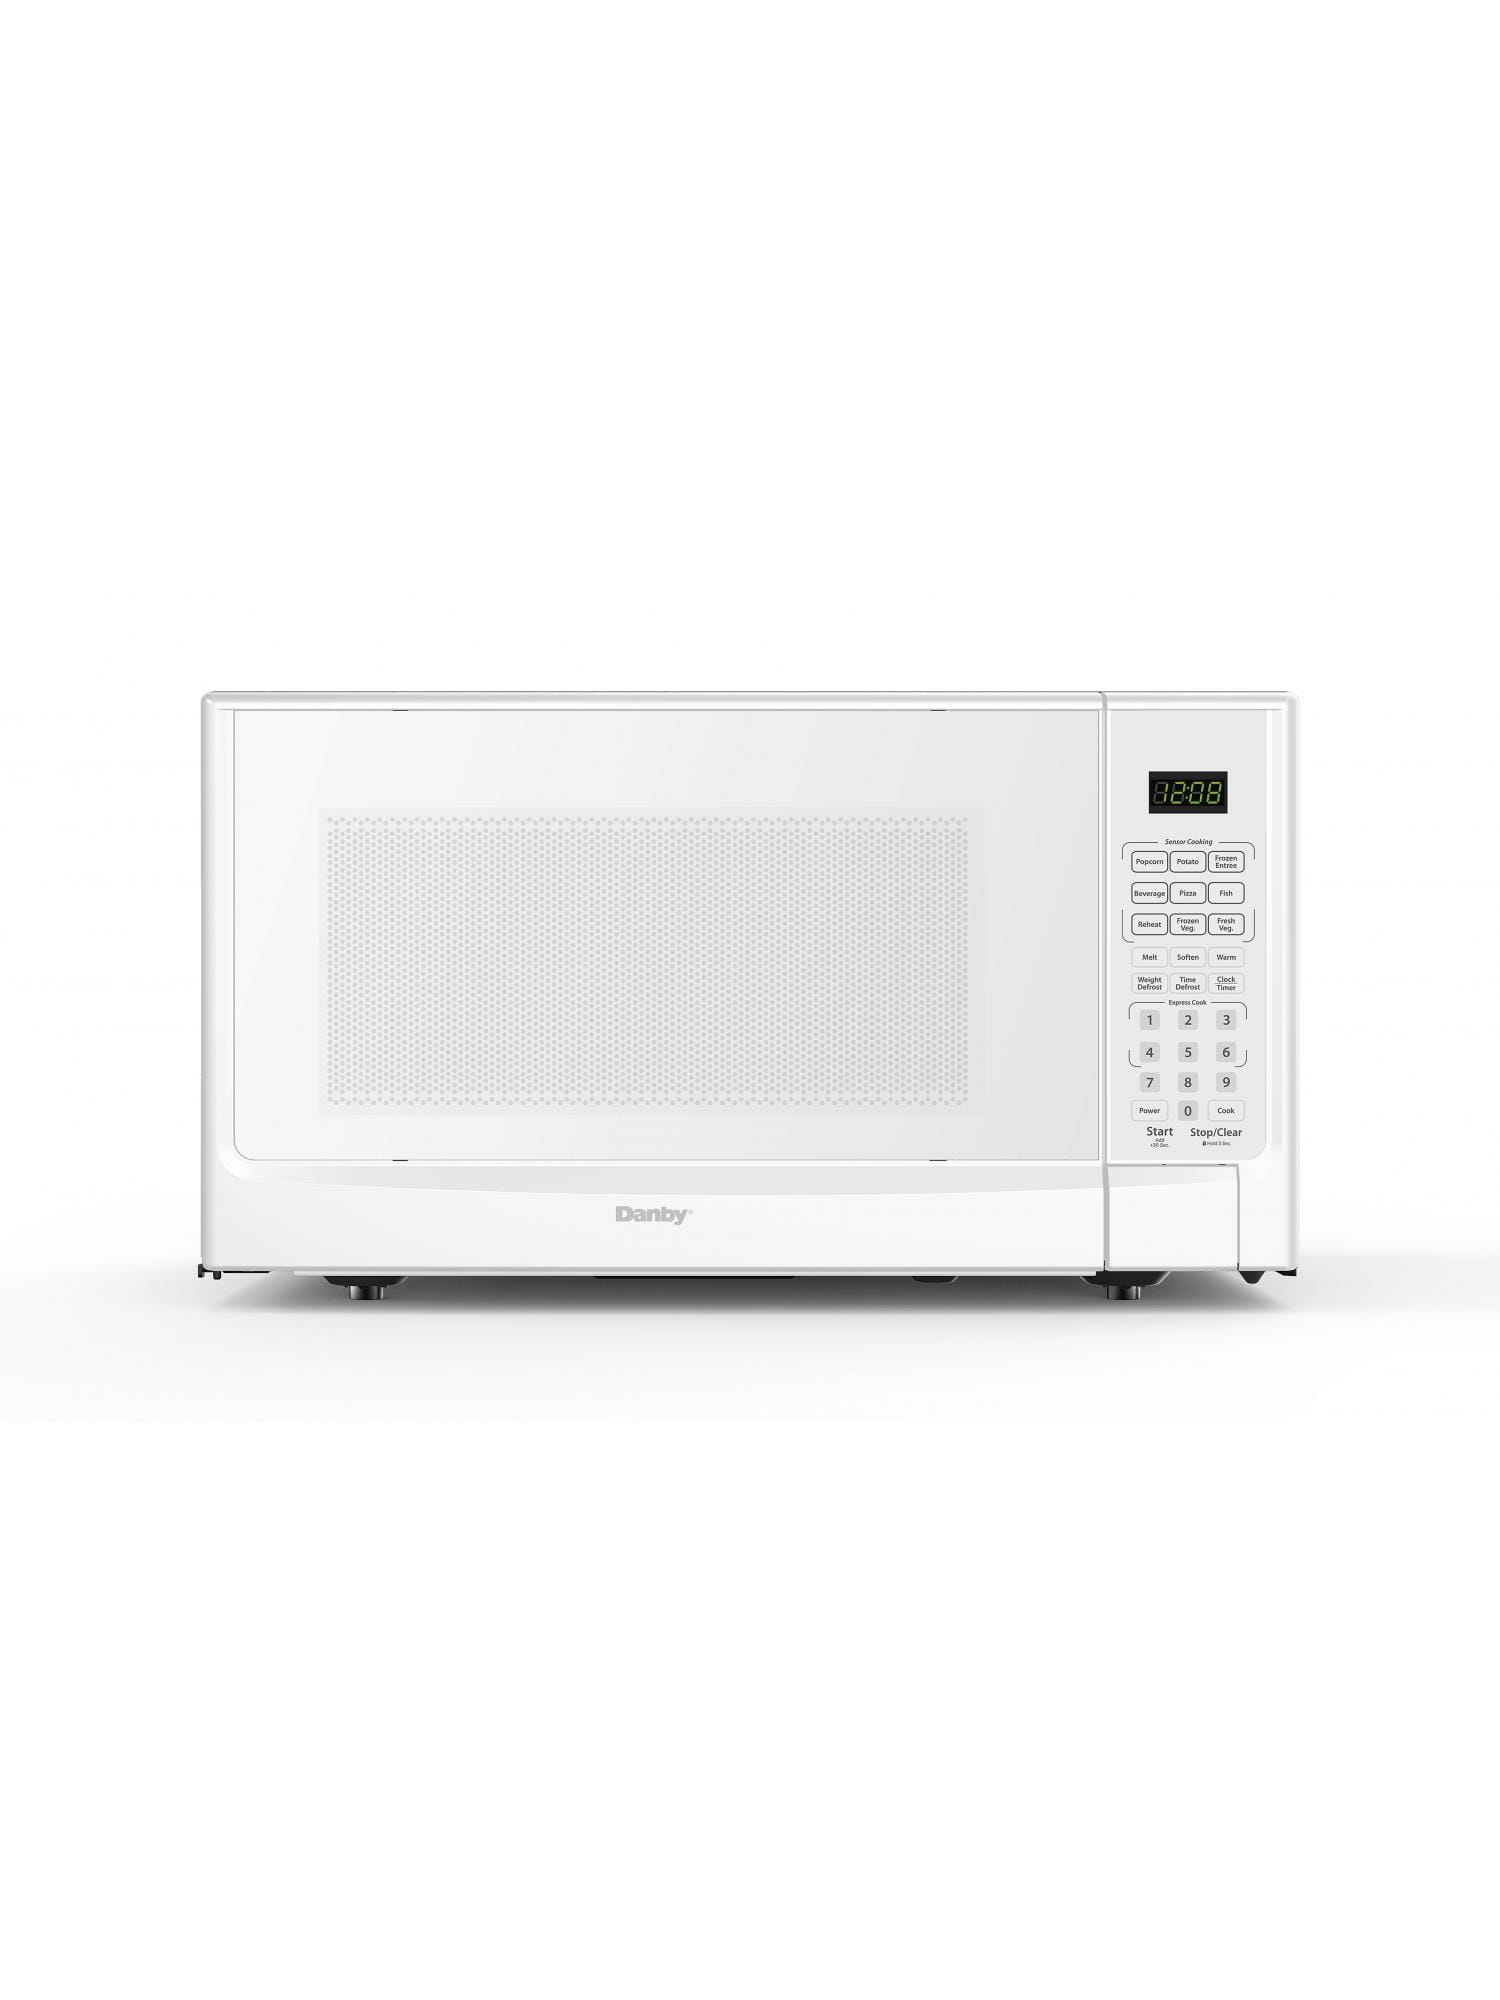 Danby - 1.4 cu. Ft  Counter top Microwave in White - DDMW01440WG1